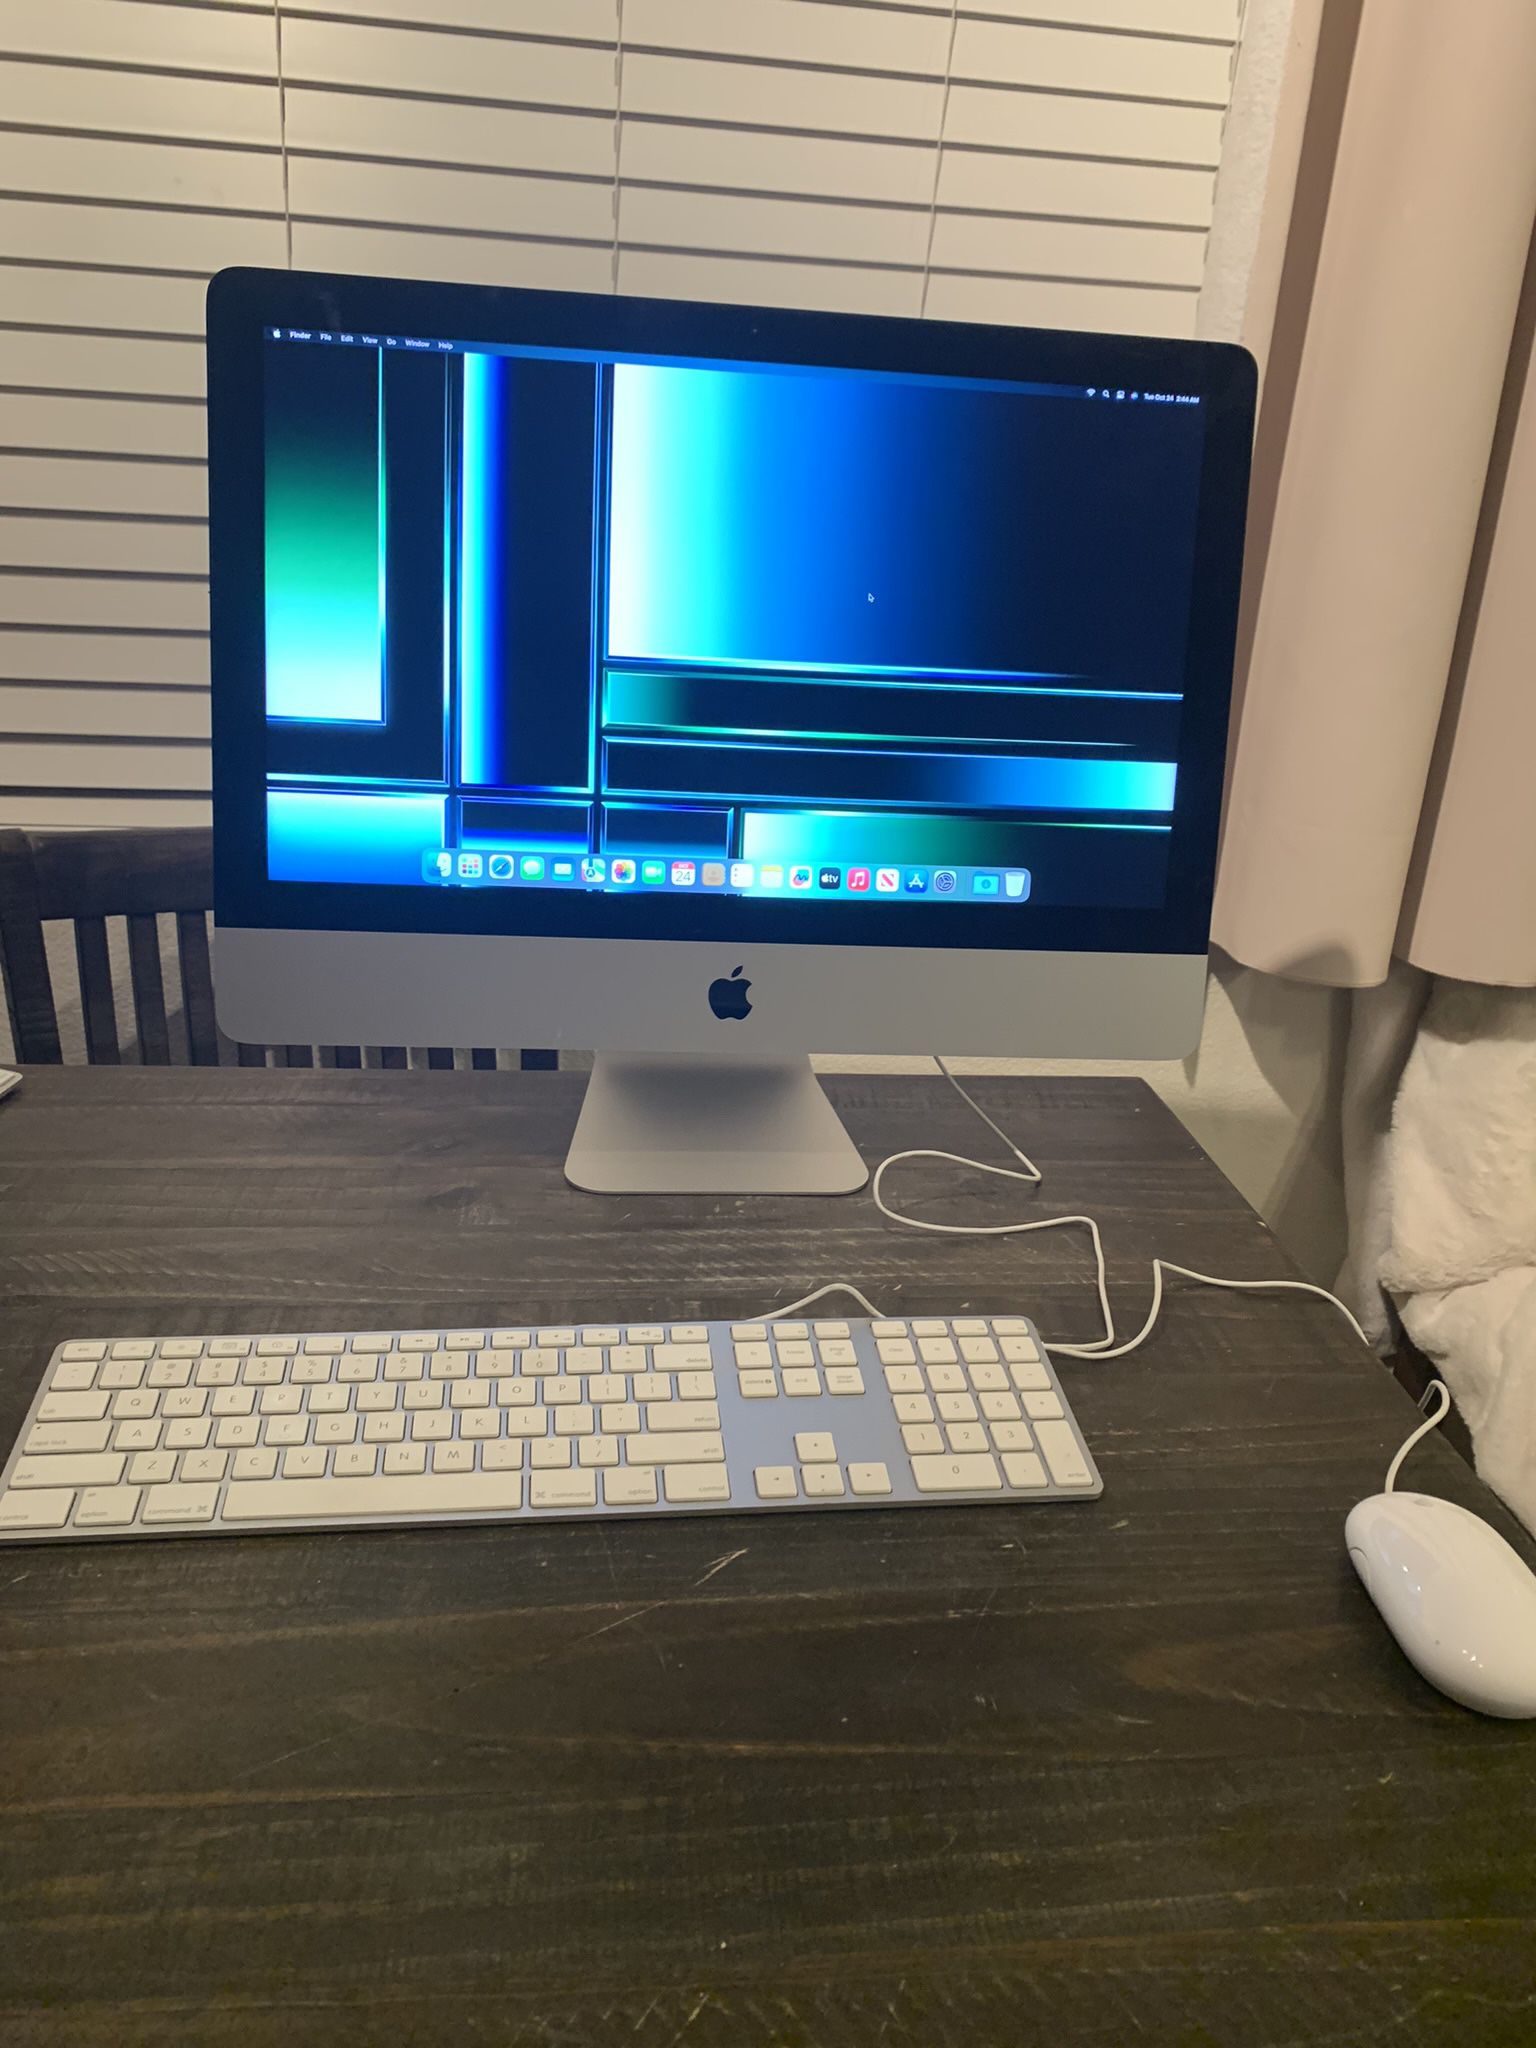 2017 Apple iMac 21.5-inch 4k Retina Display 16gb Ram 1tb Hdd . Ventura macOS. Wired Keyboard and Mouse.  Works great   Very good condition   